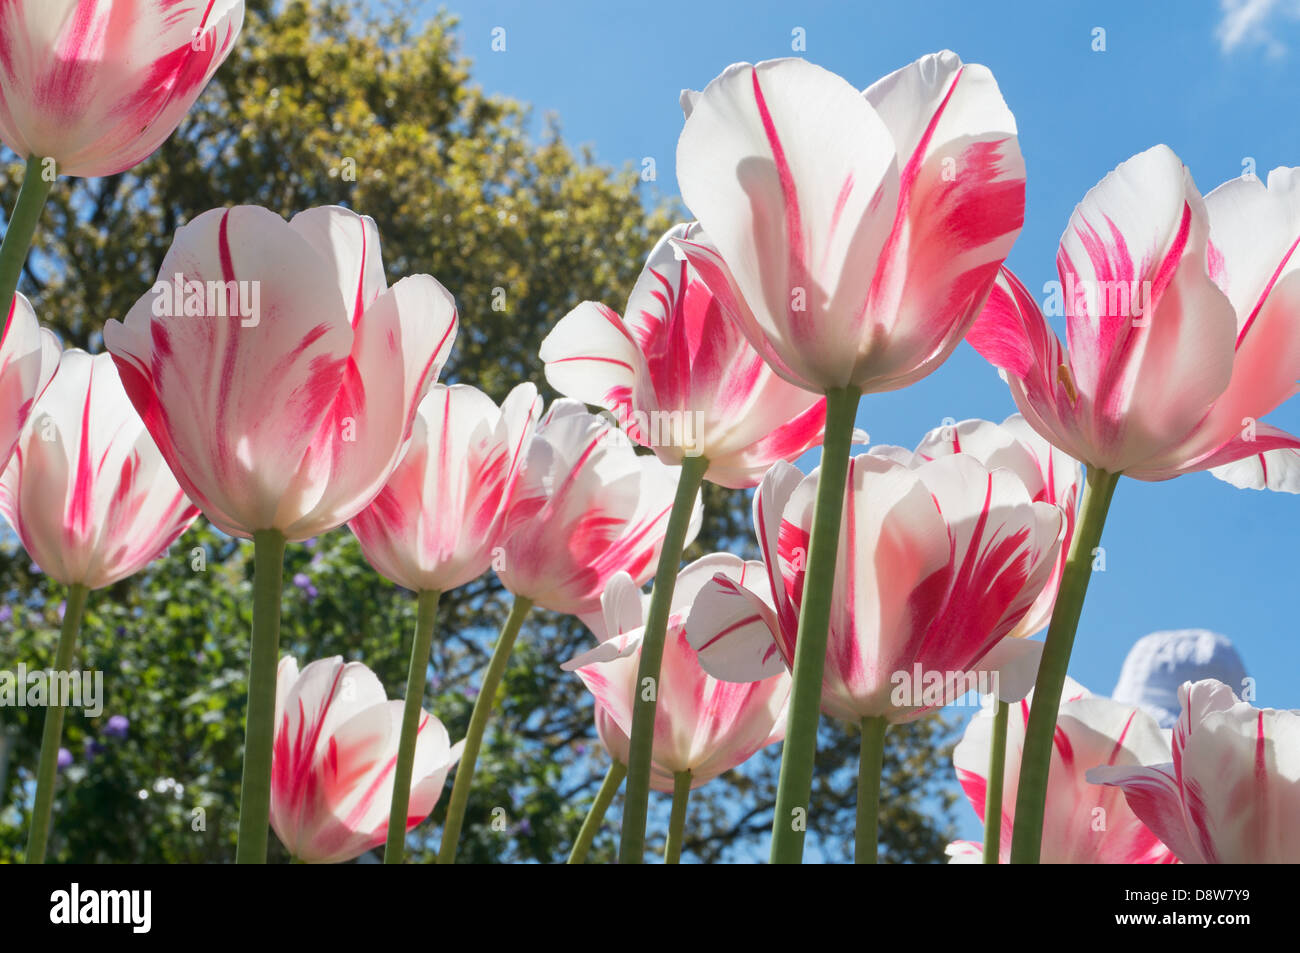 white and pink variegated tulips against the light Stock Photo